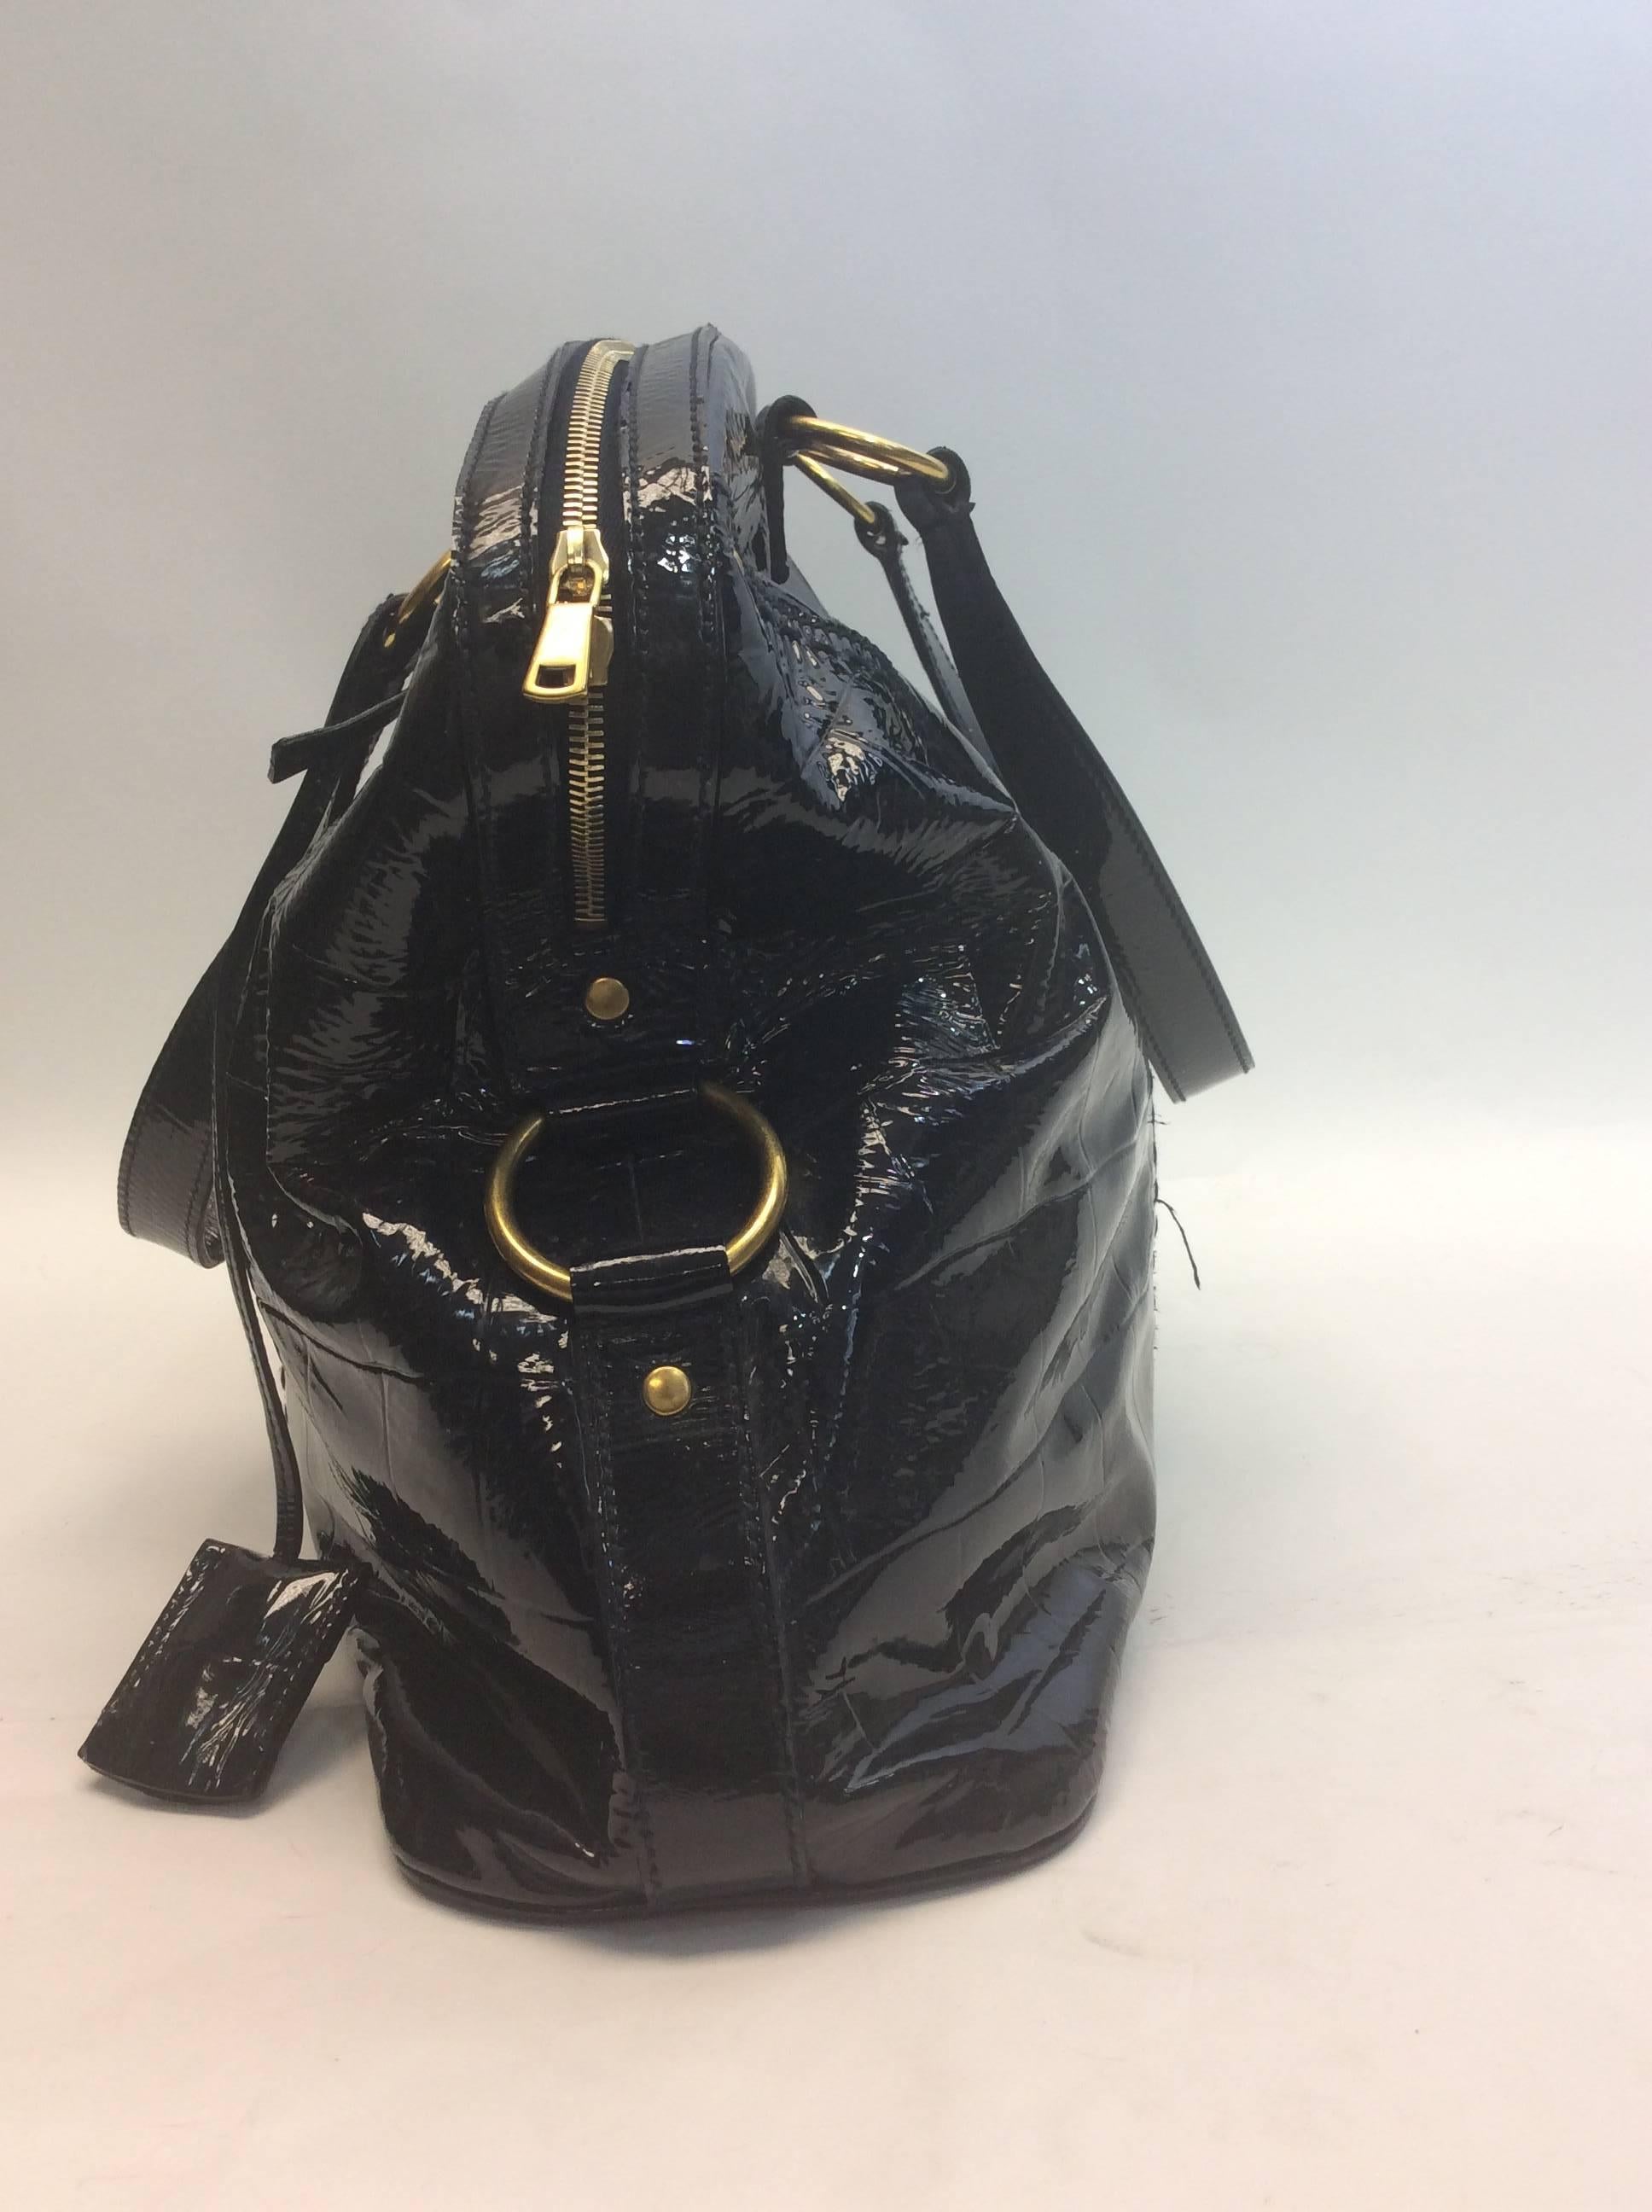 Black Patent Muse Bag
20 inches wide, 13 inches tall and 7 inches deep
7.5 inch strap drop
Features double zipper closure (one zipper is missing a pull)
Includes YSL padlock and key
One open and one zipped interior pocket
Patent leather exterior